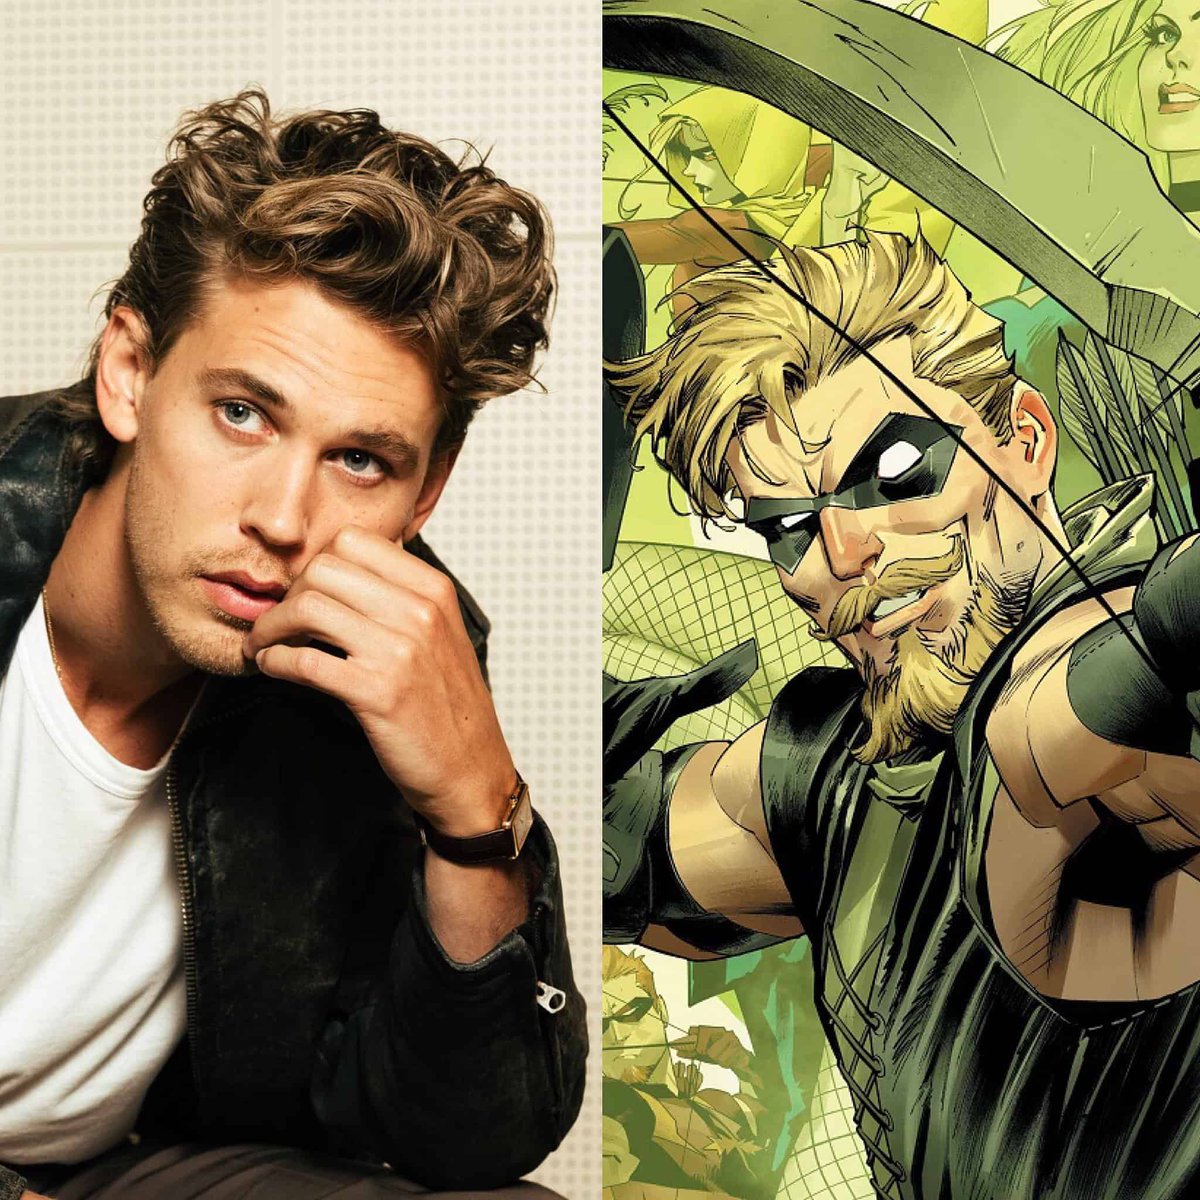 No marvel.. he will sure come to DC for unique roles like Green Arrow and other one. 
#AustinButler #GreenArrow